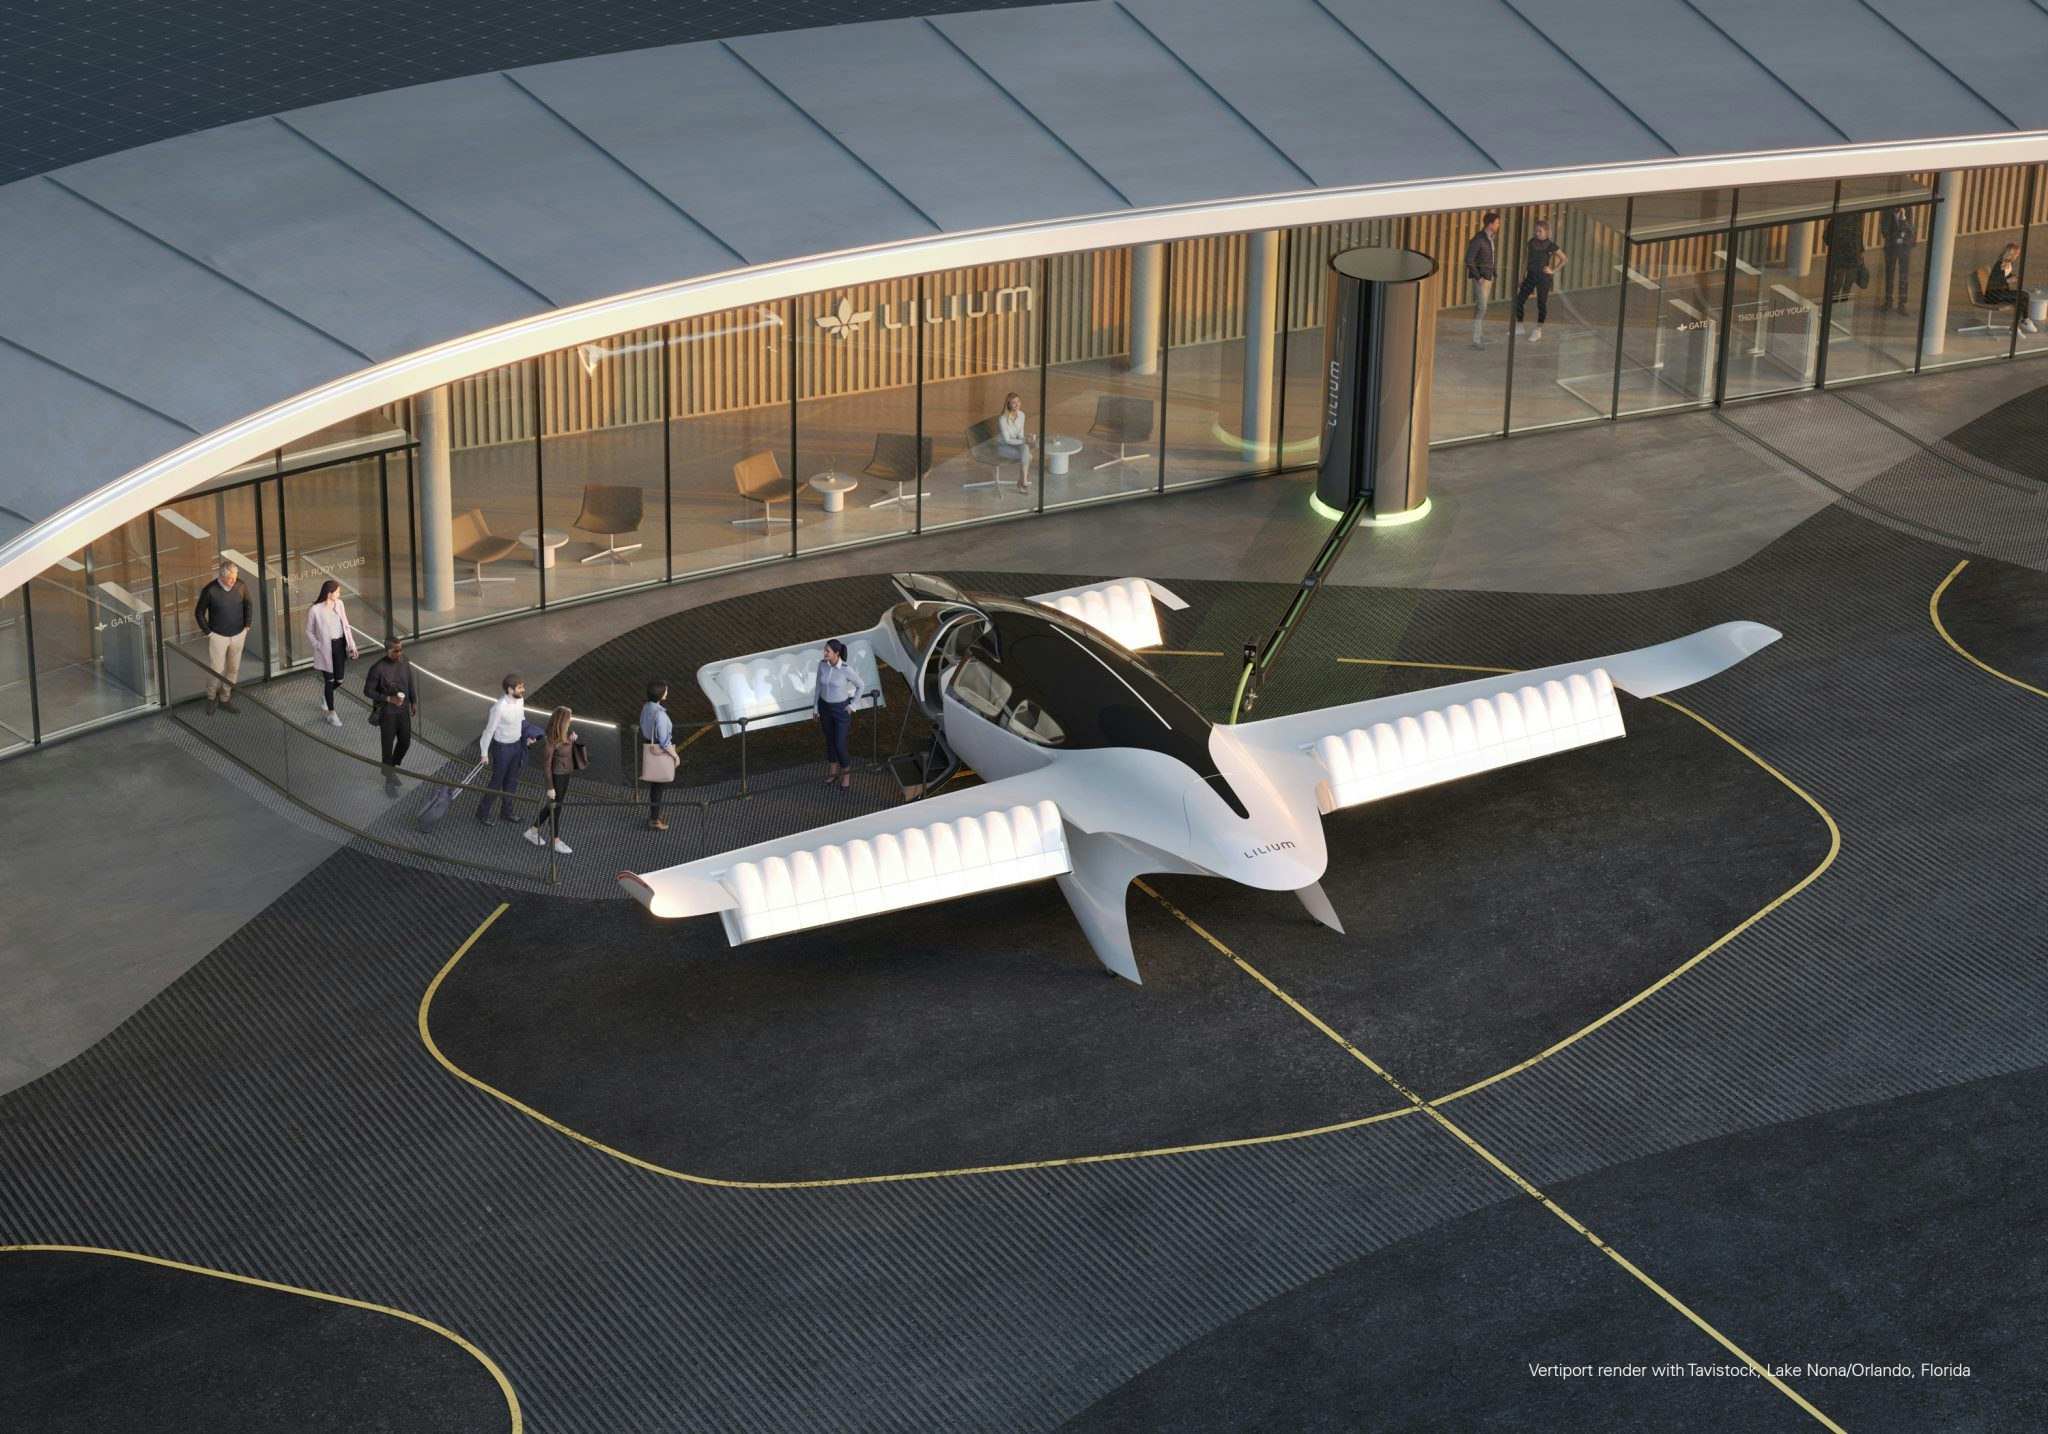 Lilium's 7-seater flying taxi